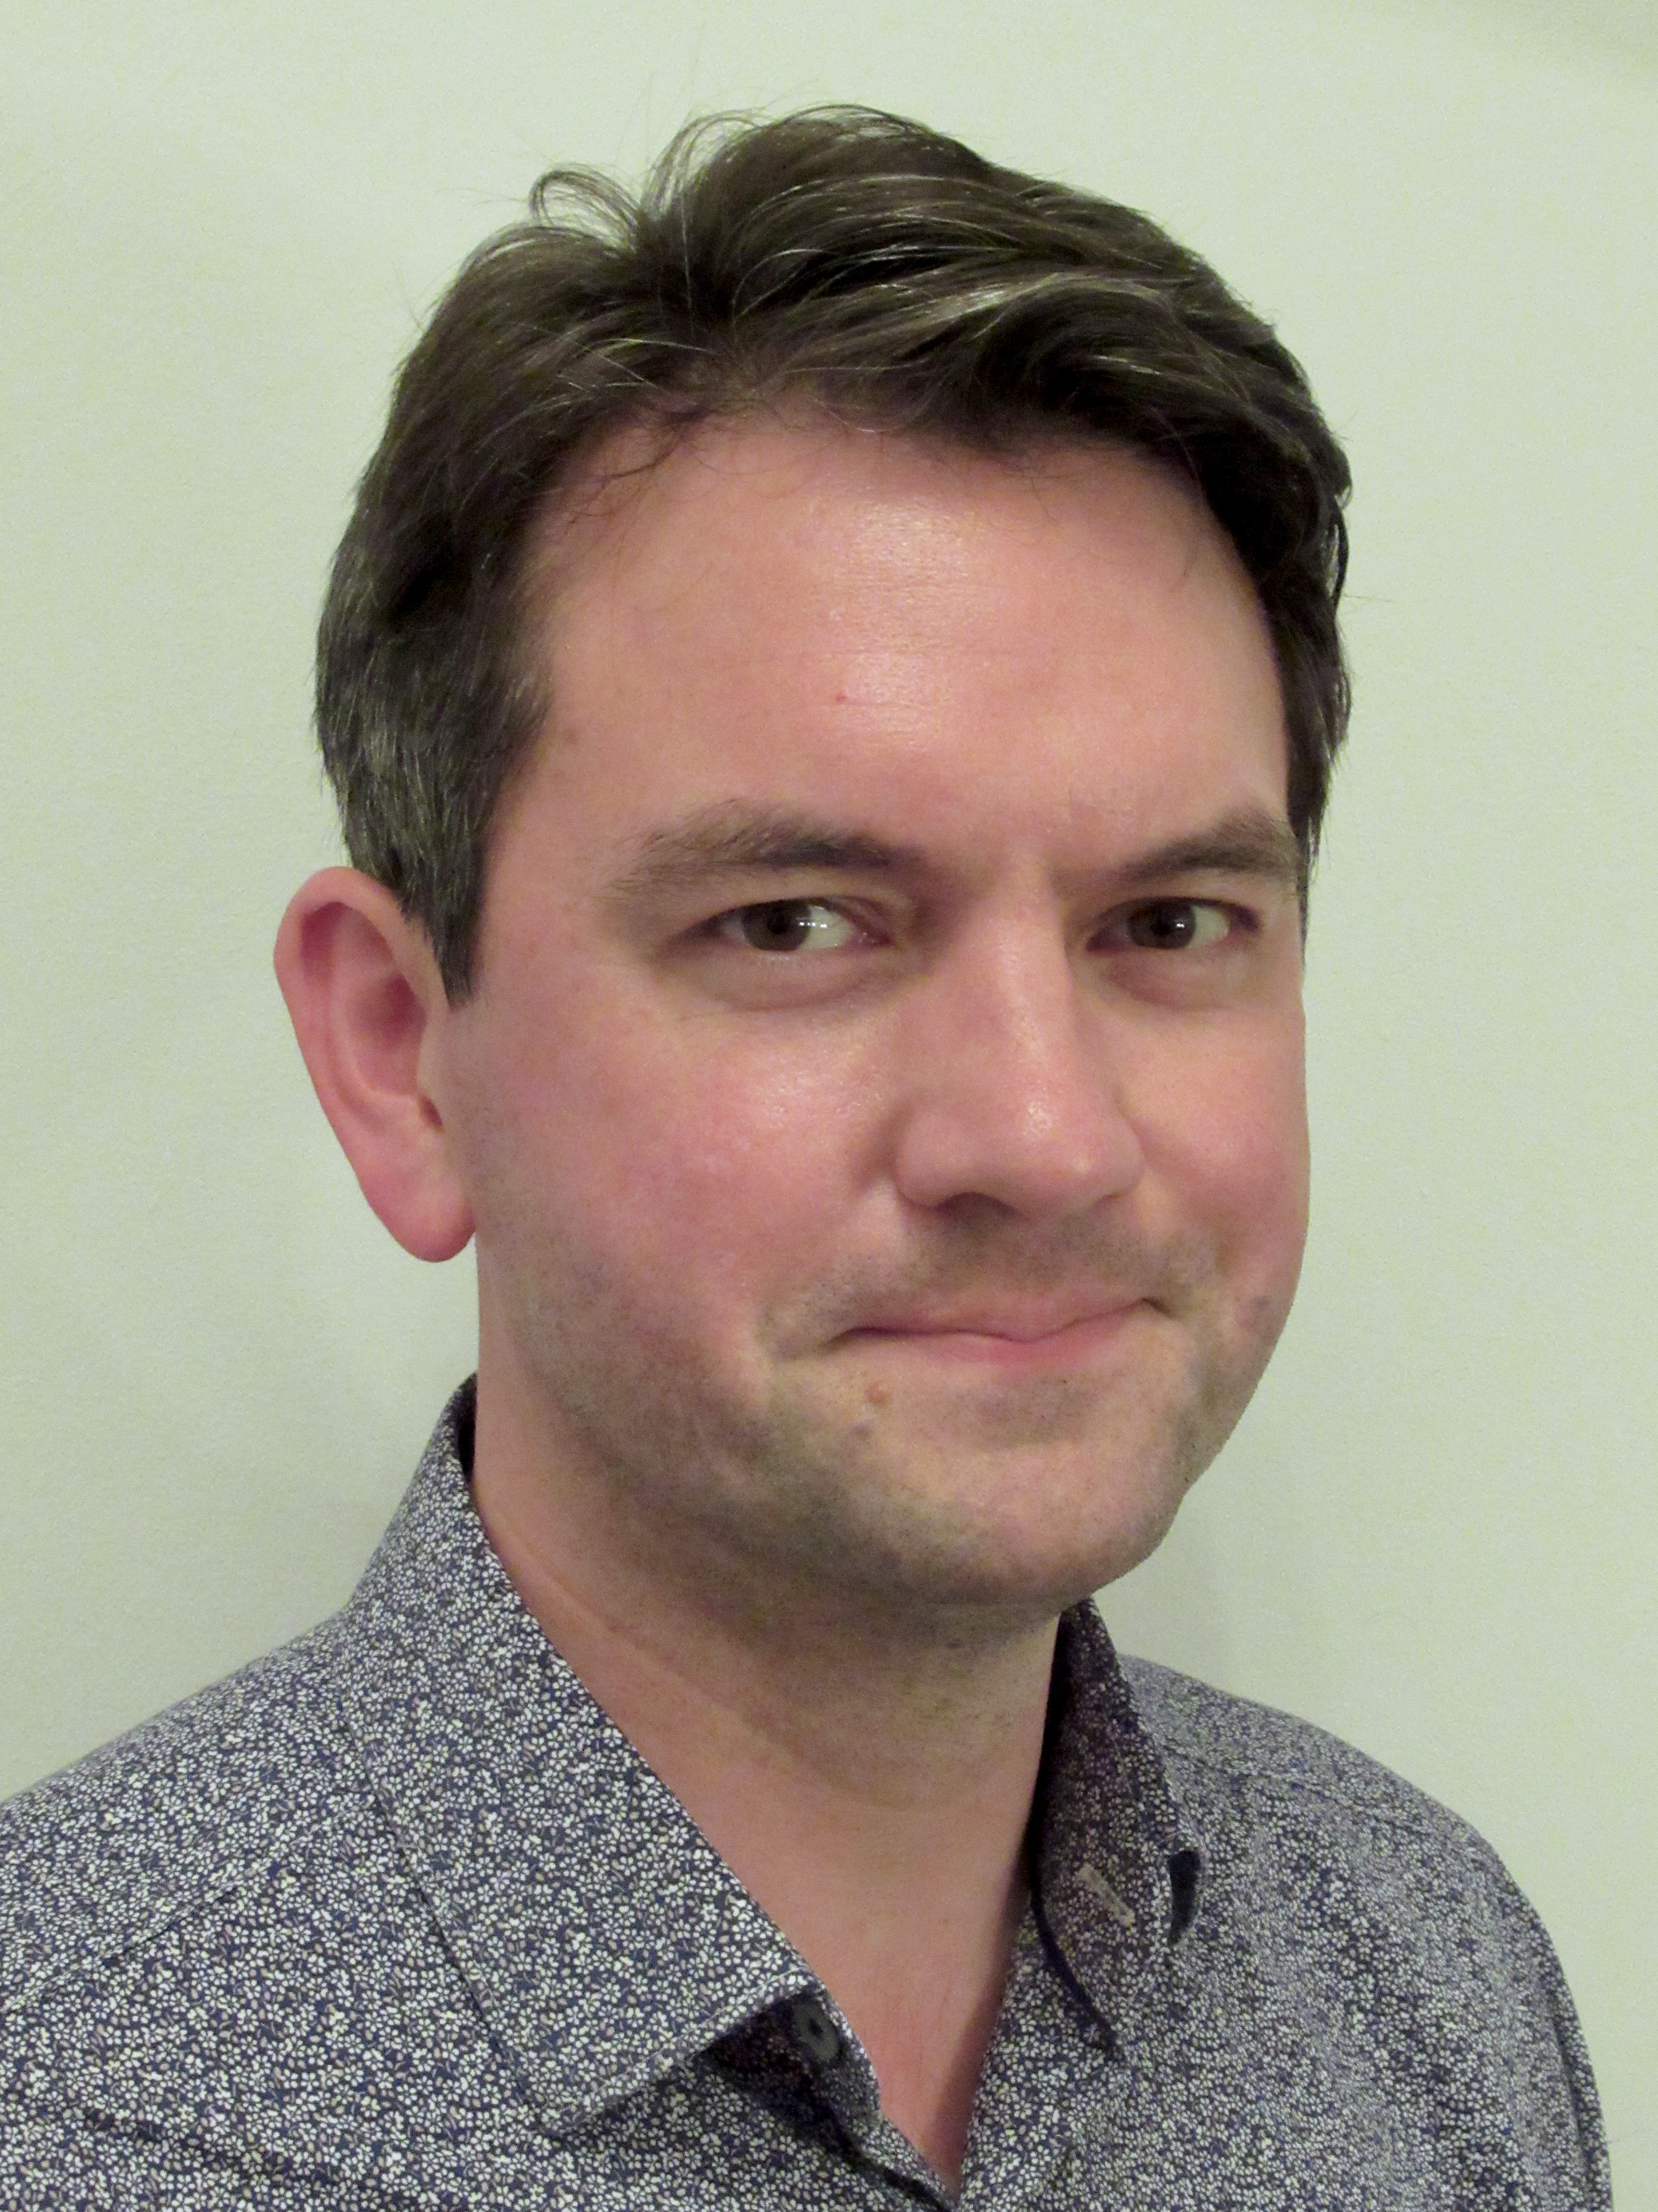 Image of Niall Boyce, Head of Field Building for Wellcome's Mental Health team.